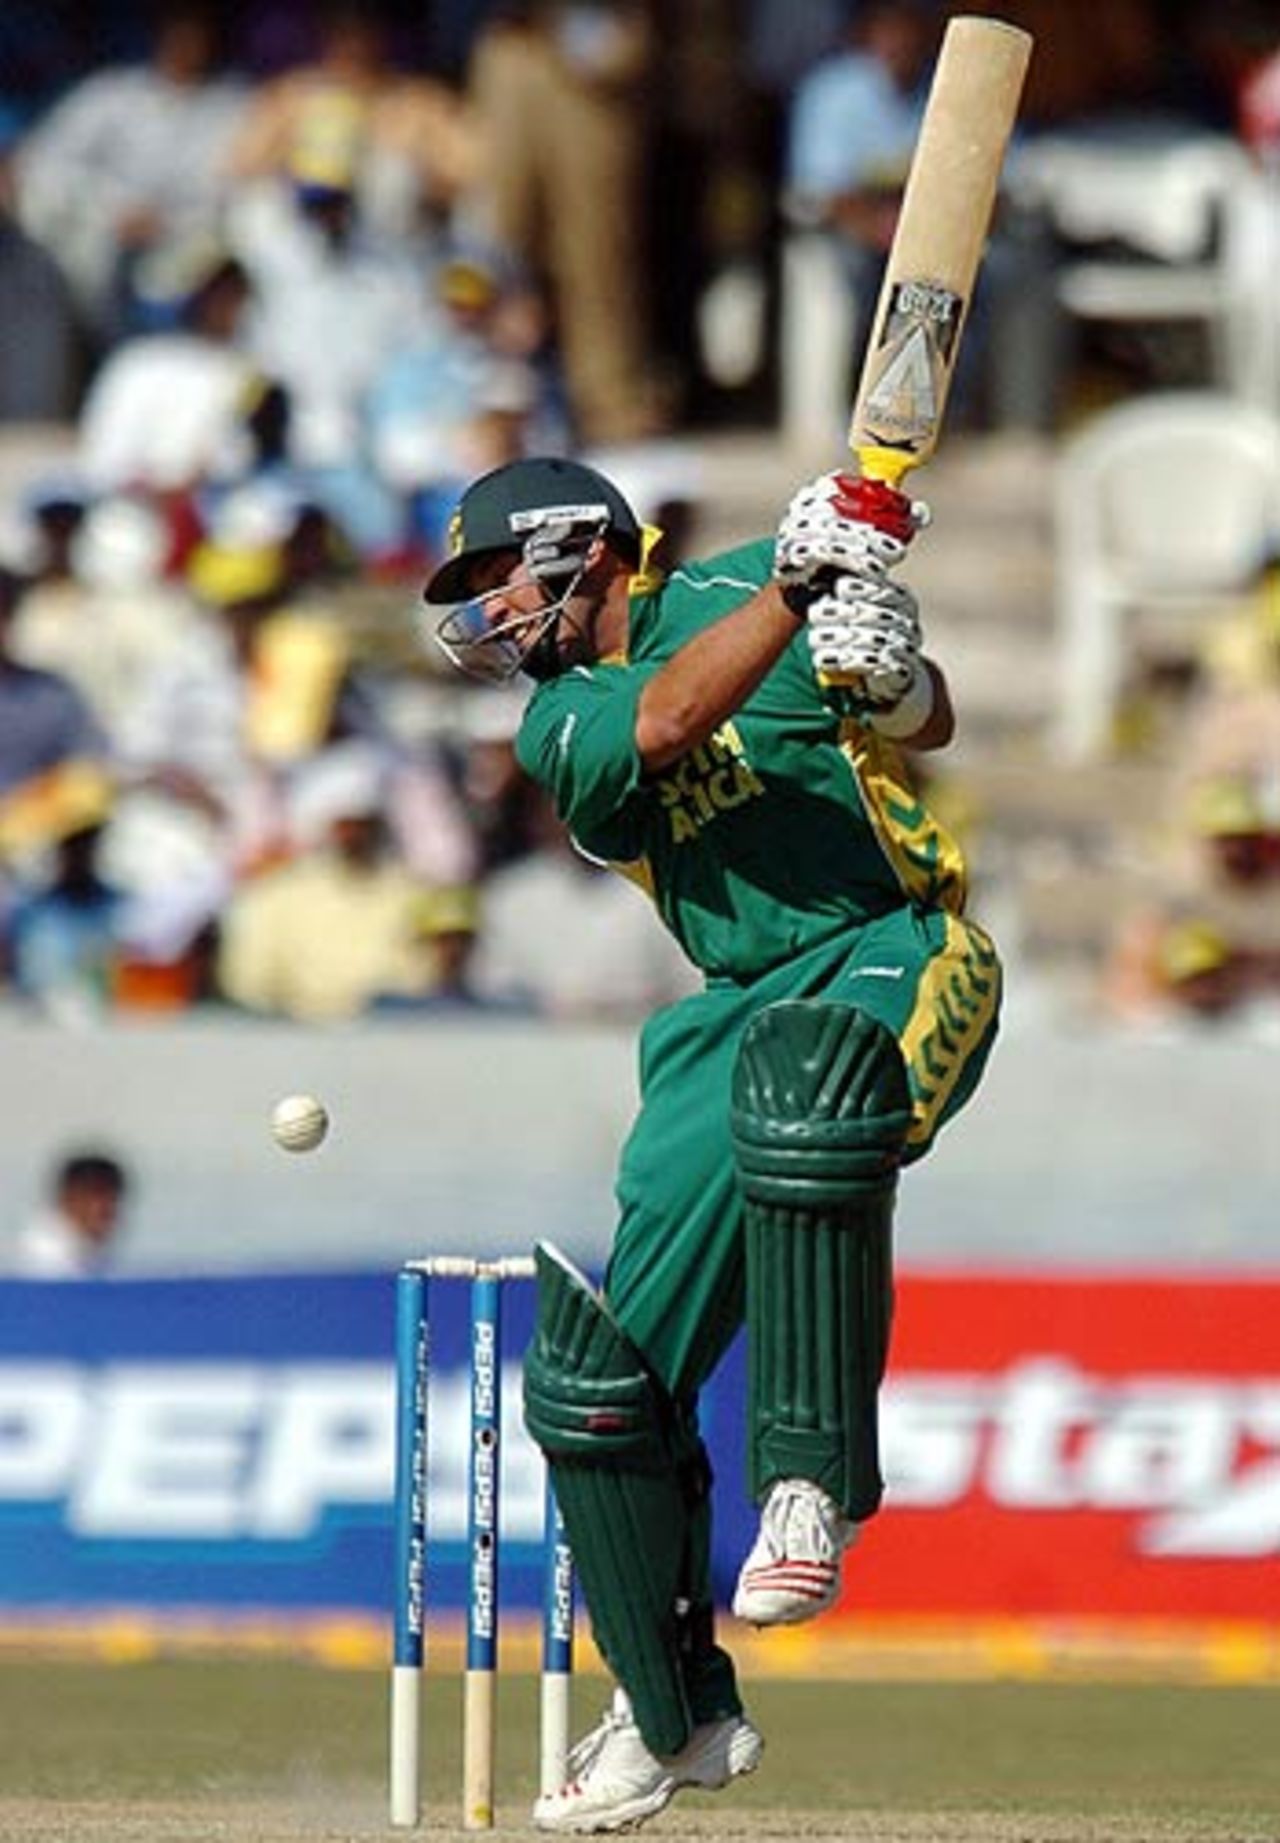 Jacques Kallis' unbeaten 68 took South Africa to a 5-wicket win over India, India v South Africa, 1st ODI, Hyderabad, November 16, 2005